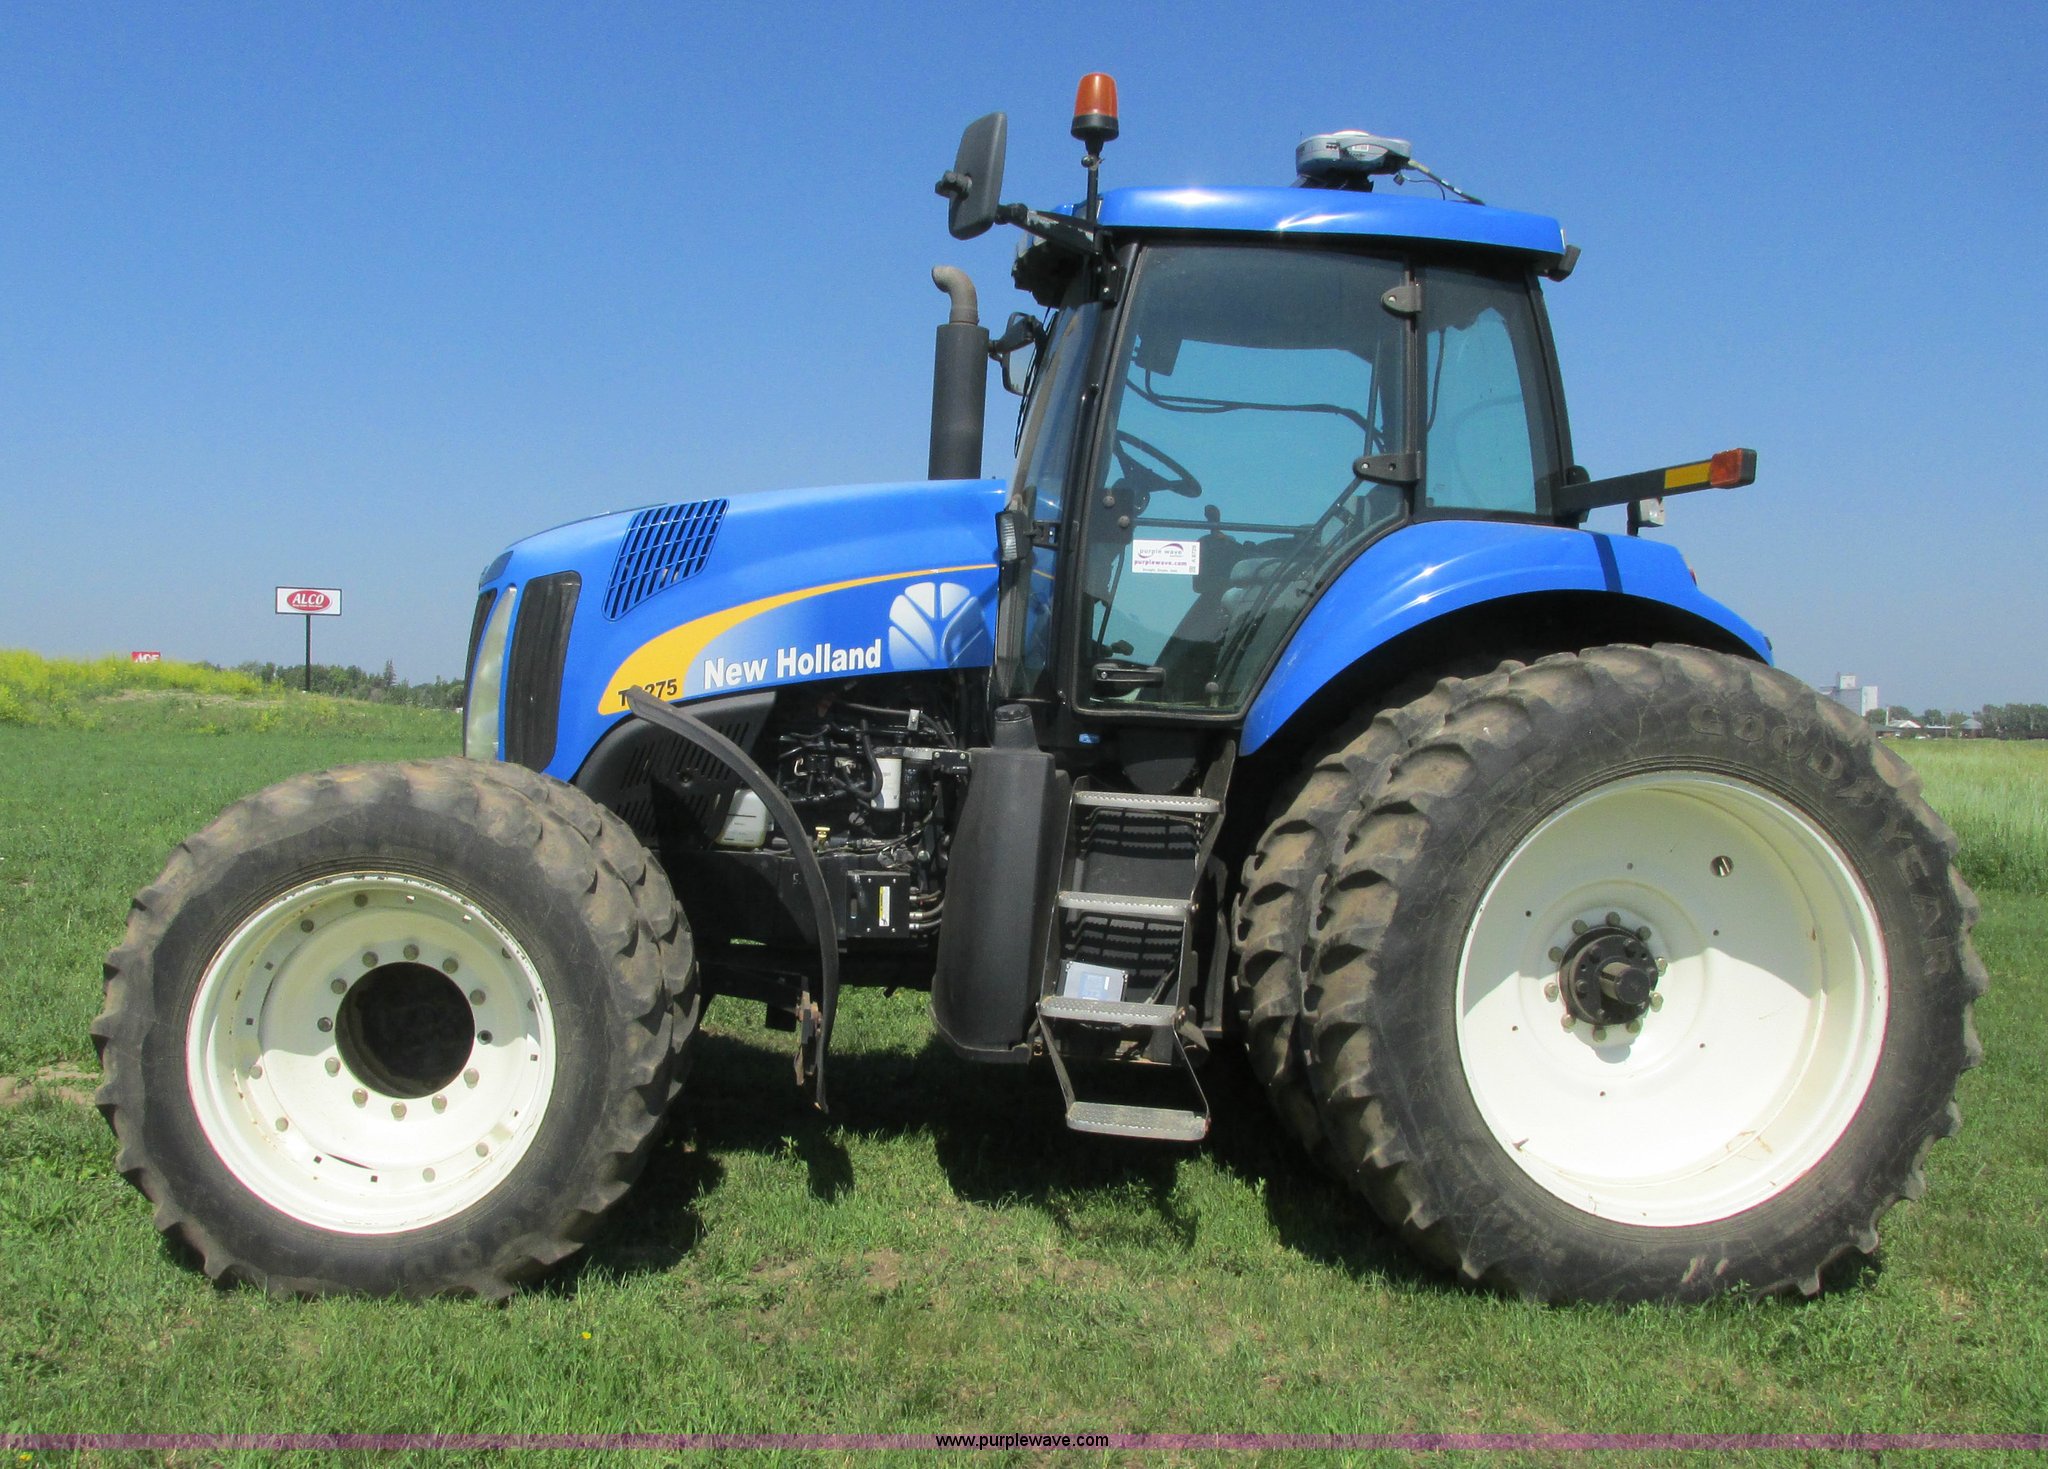 2006 New Holland TG275 MFWD tractor | Item A8729 selling at SOLD! July ...